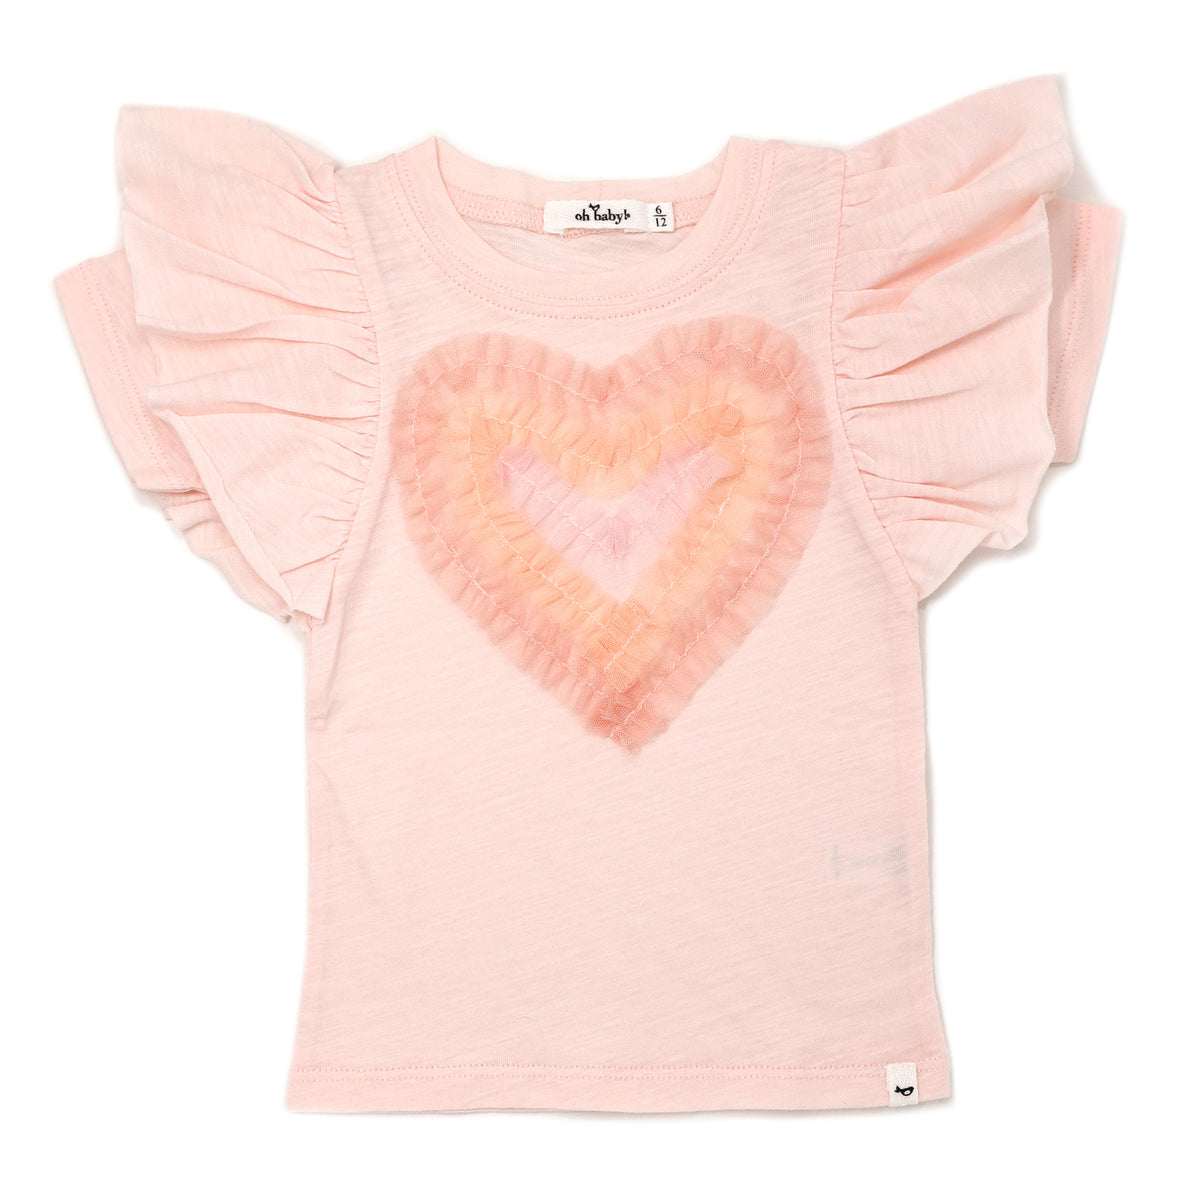 oh baby! Cotton Slub Butterfly Short Sleeve Tee - Tulle Heart Applique - Pale Pink